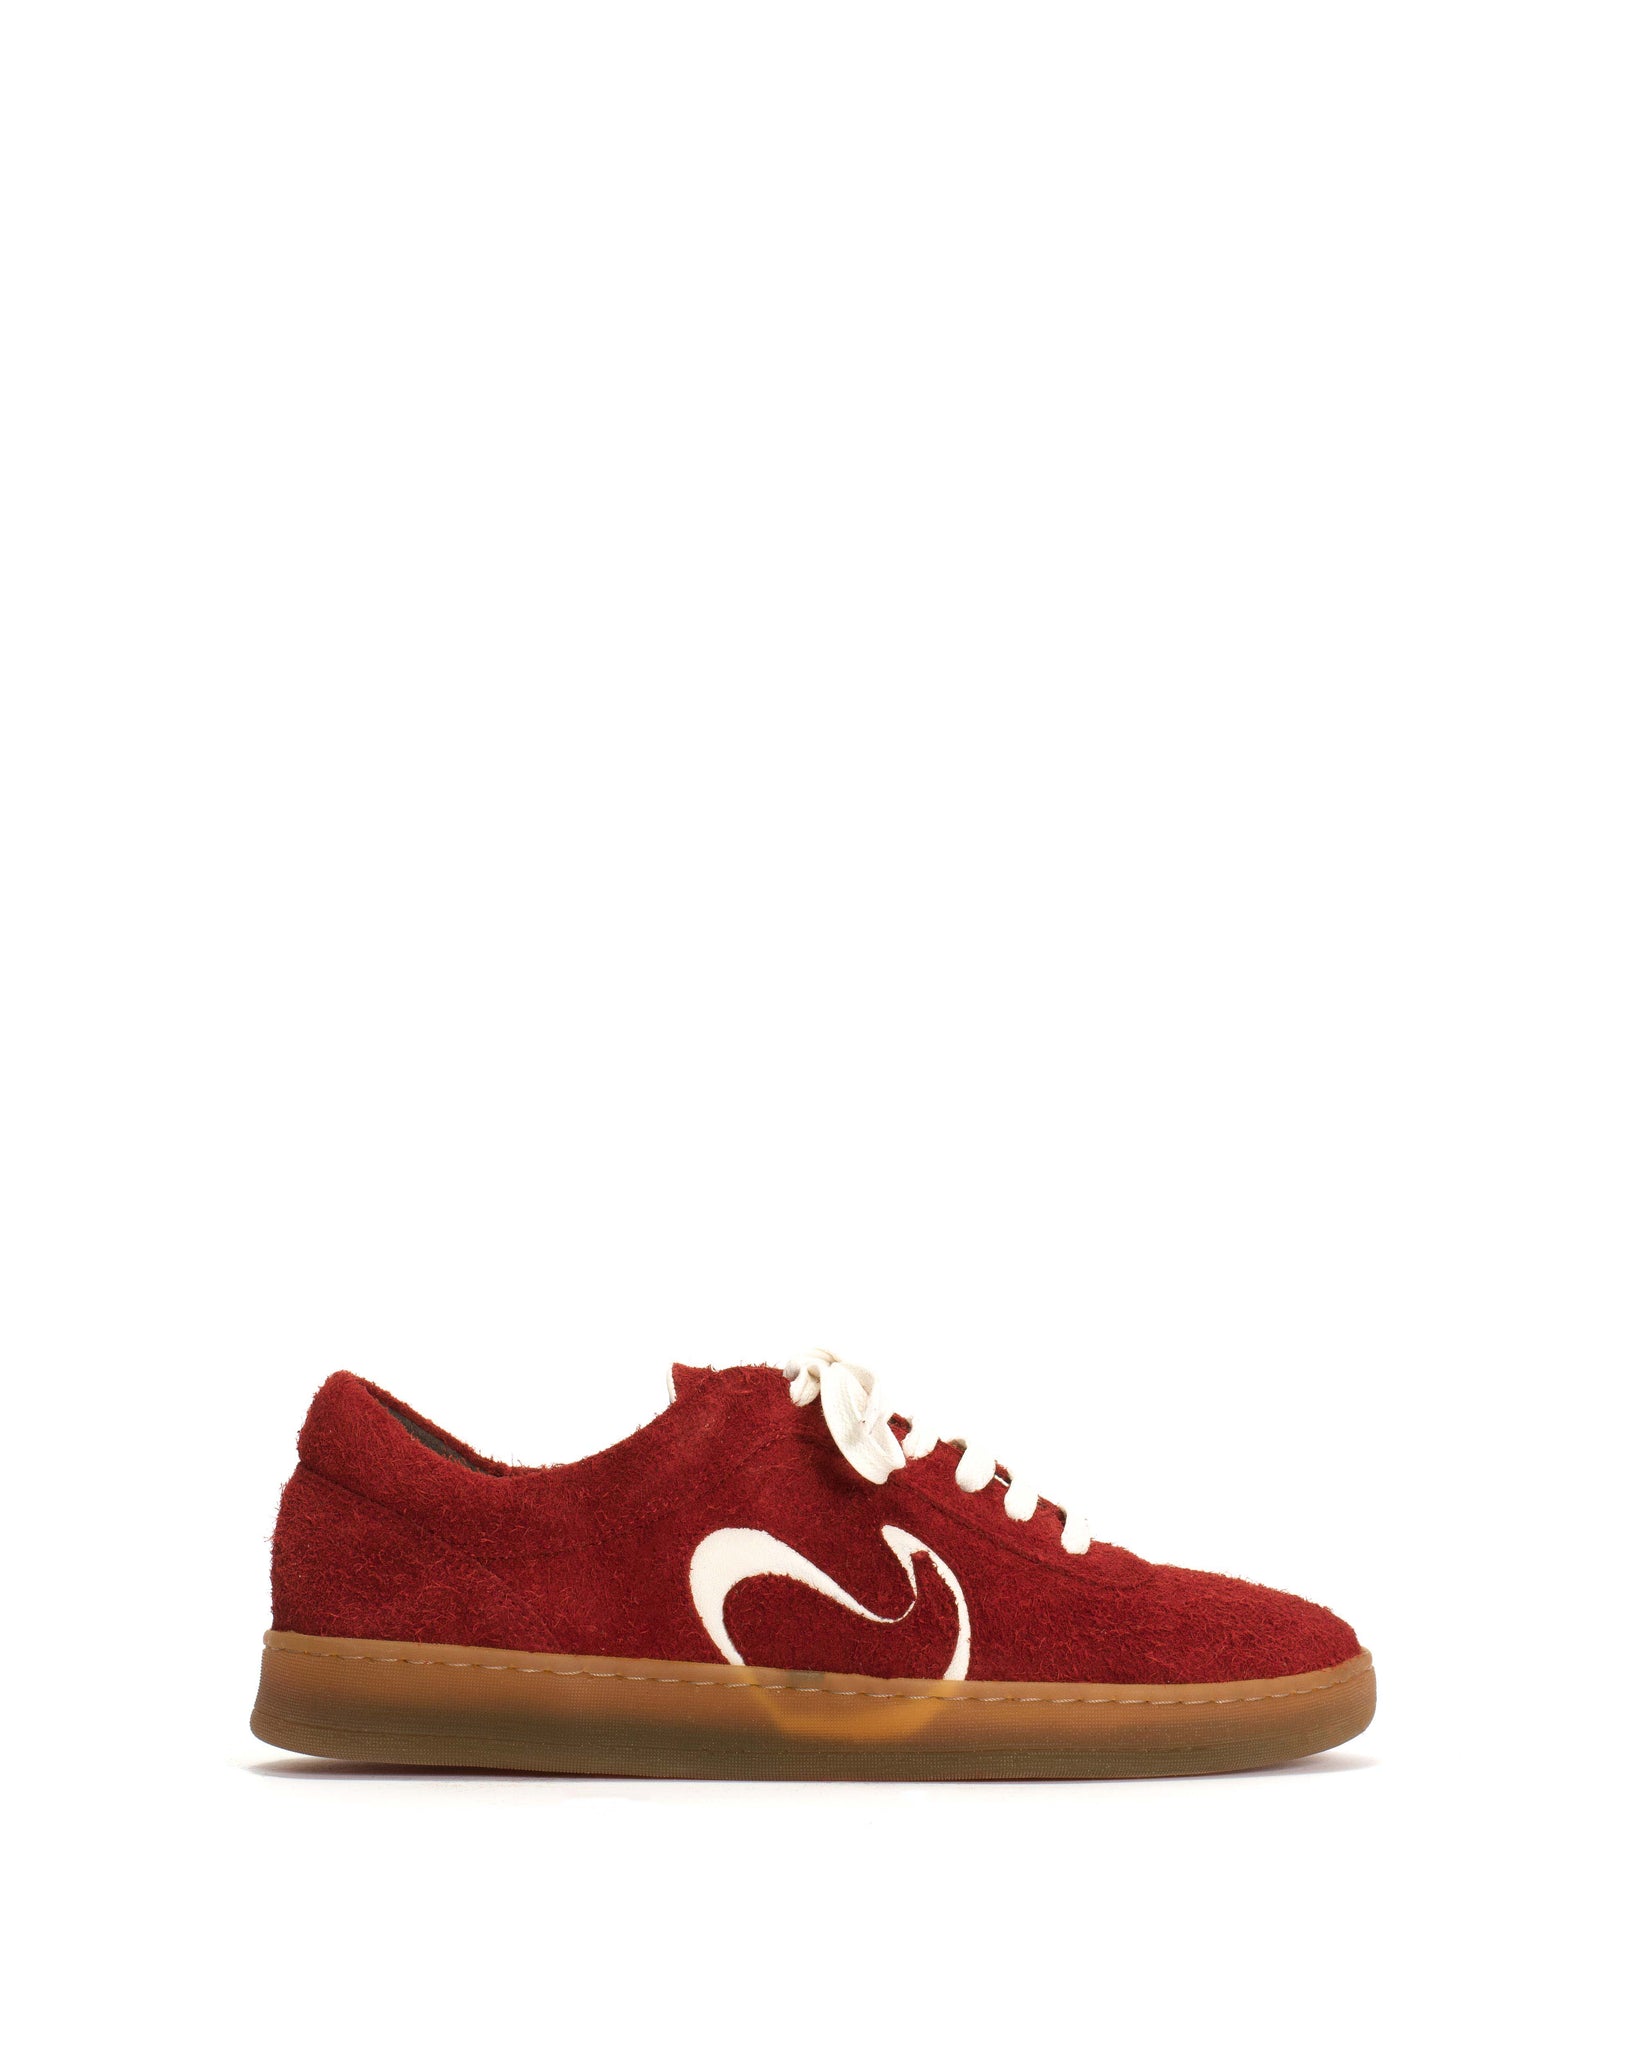 Blaire Plushed calf suede Ruby red - Anonymous Copenhagen